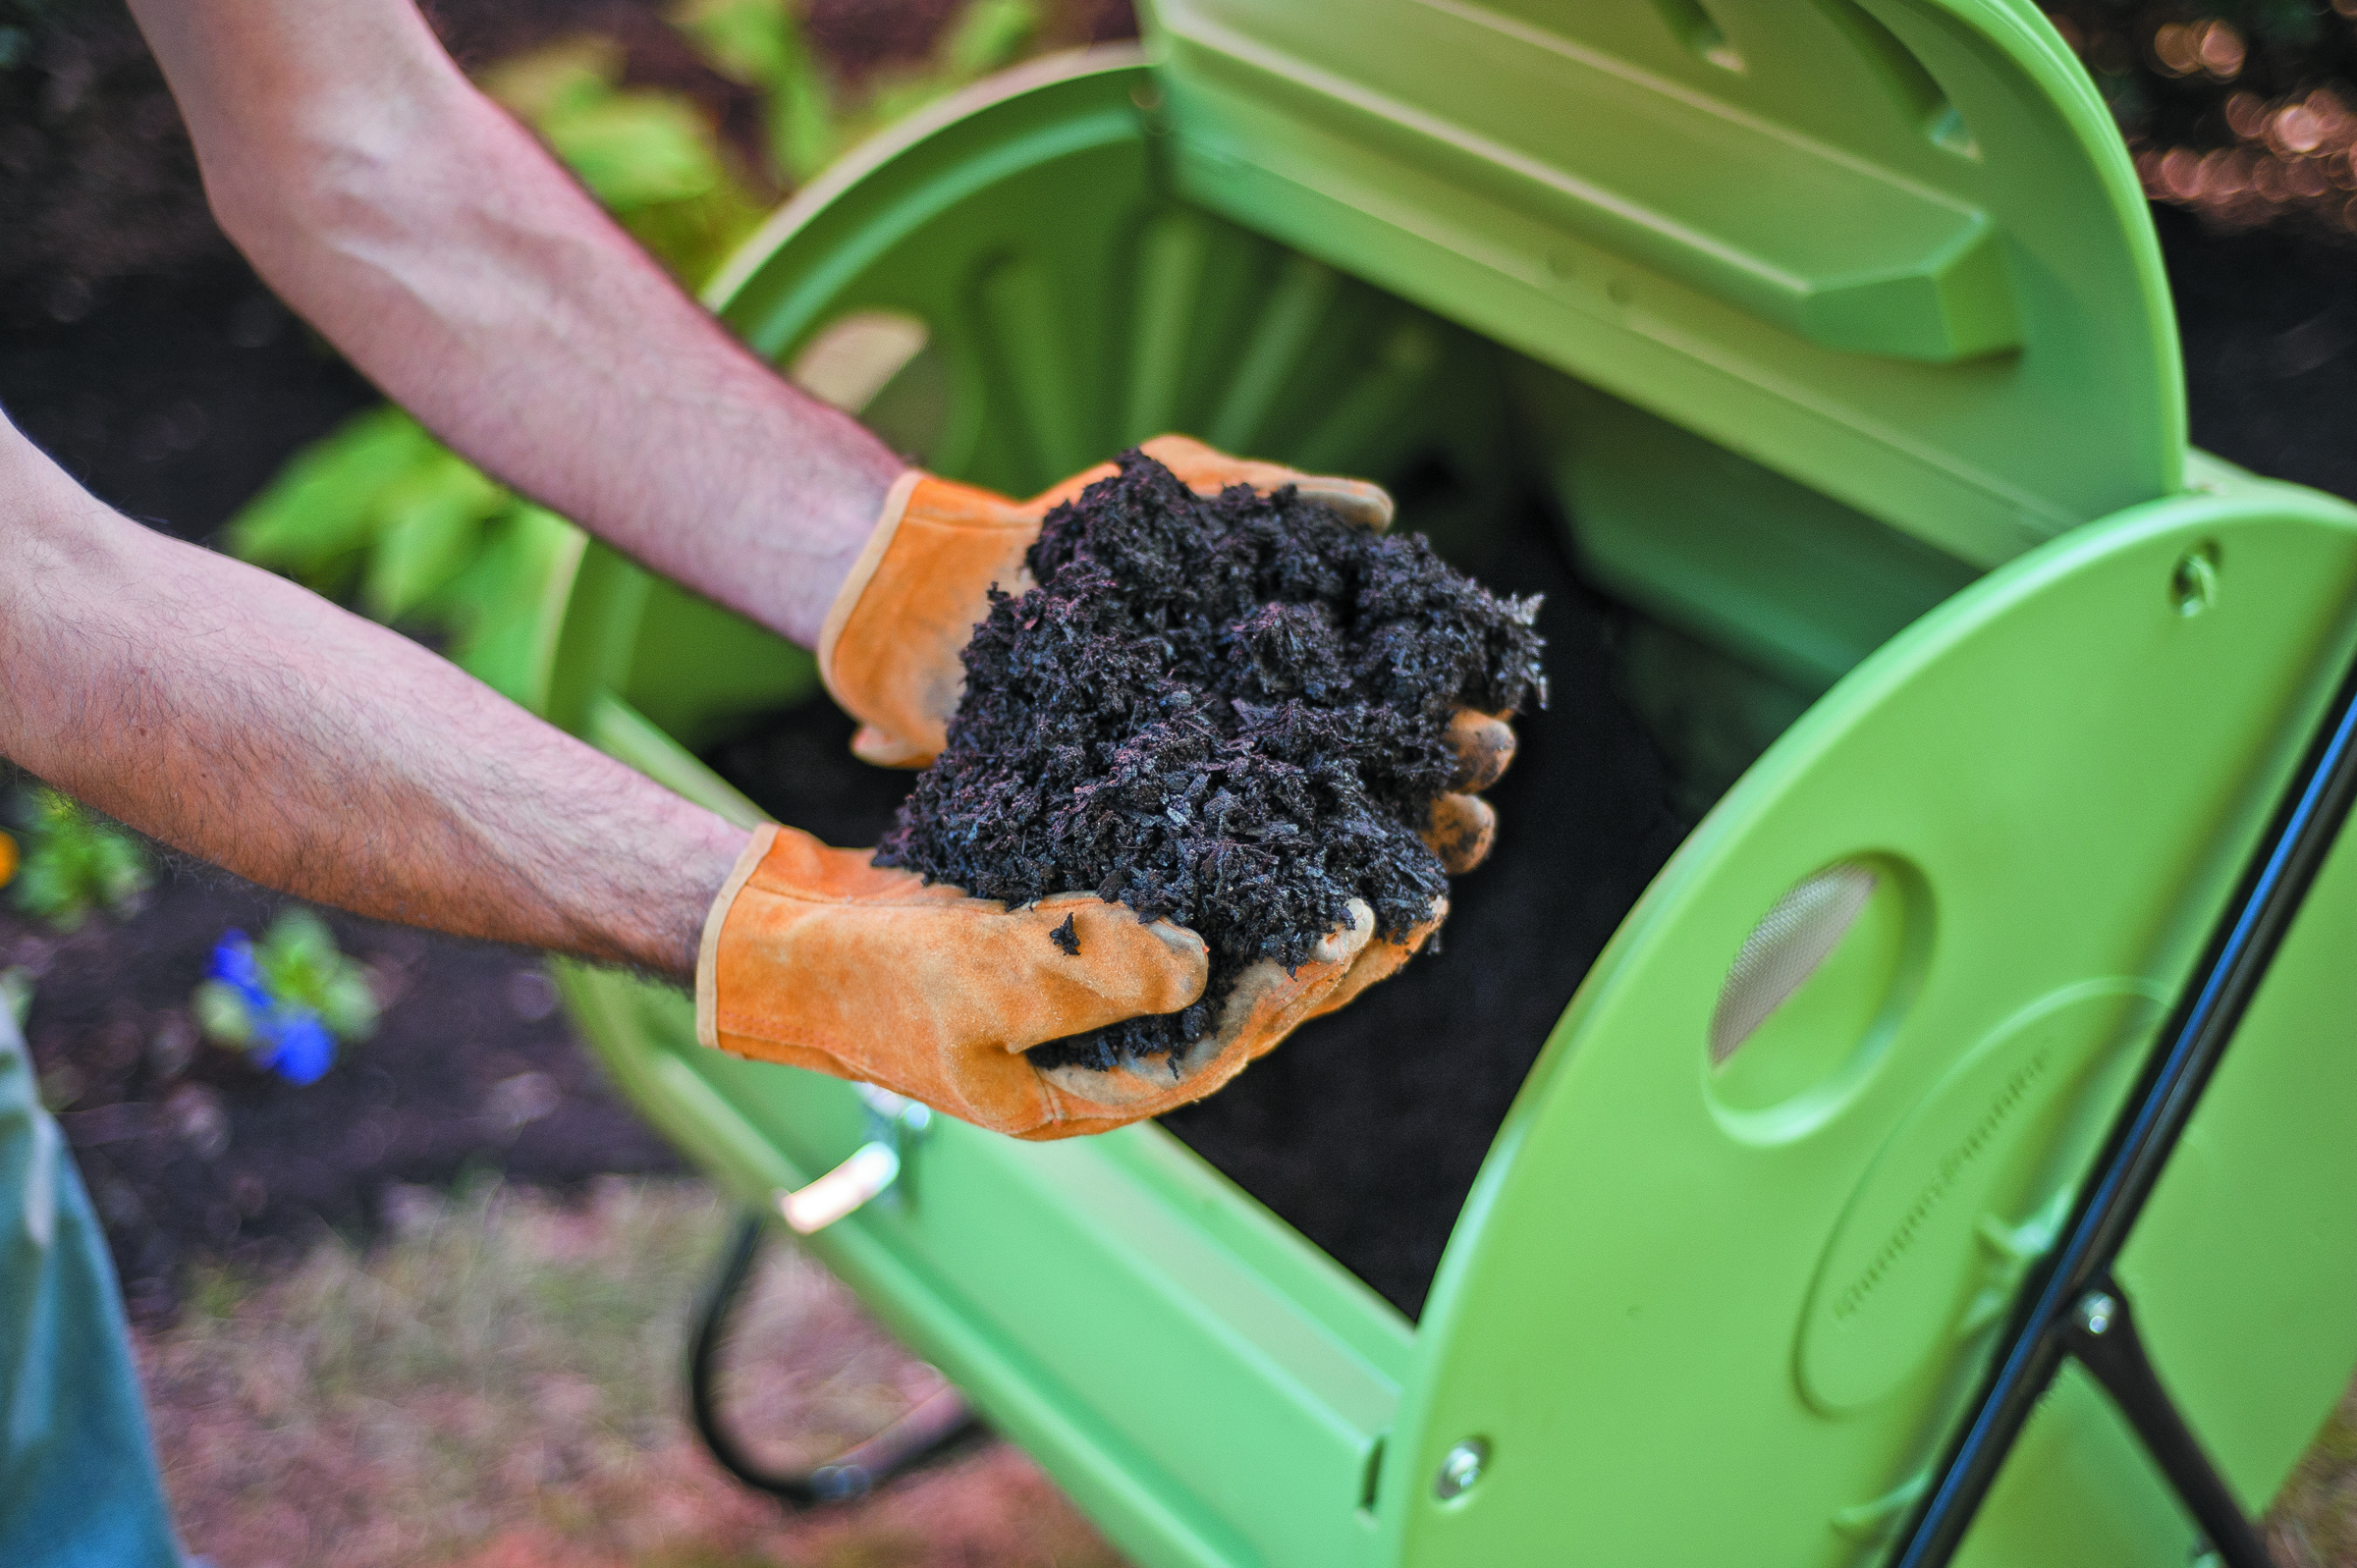 Backyard composting classes, rain barrel workshops and more from PRC